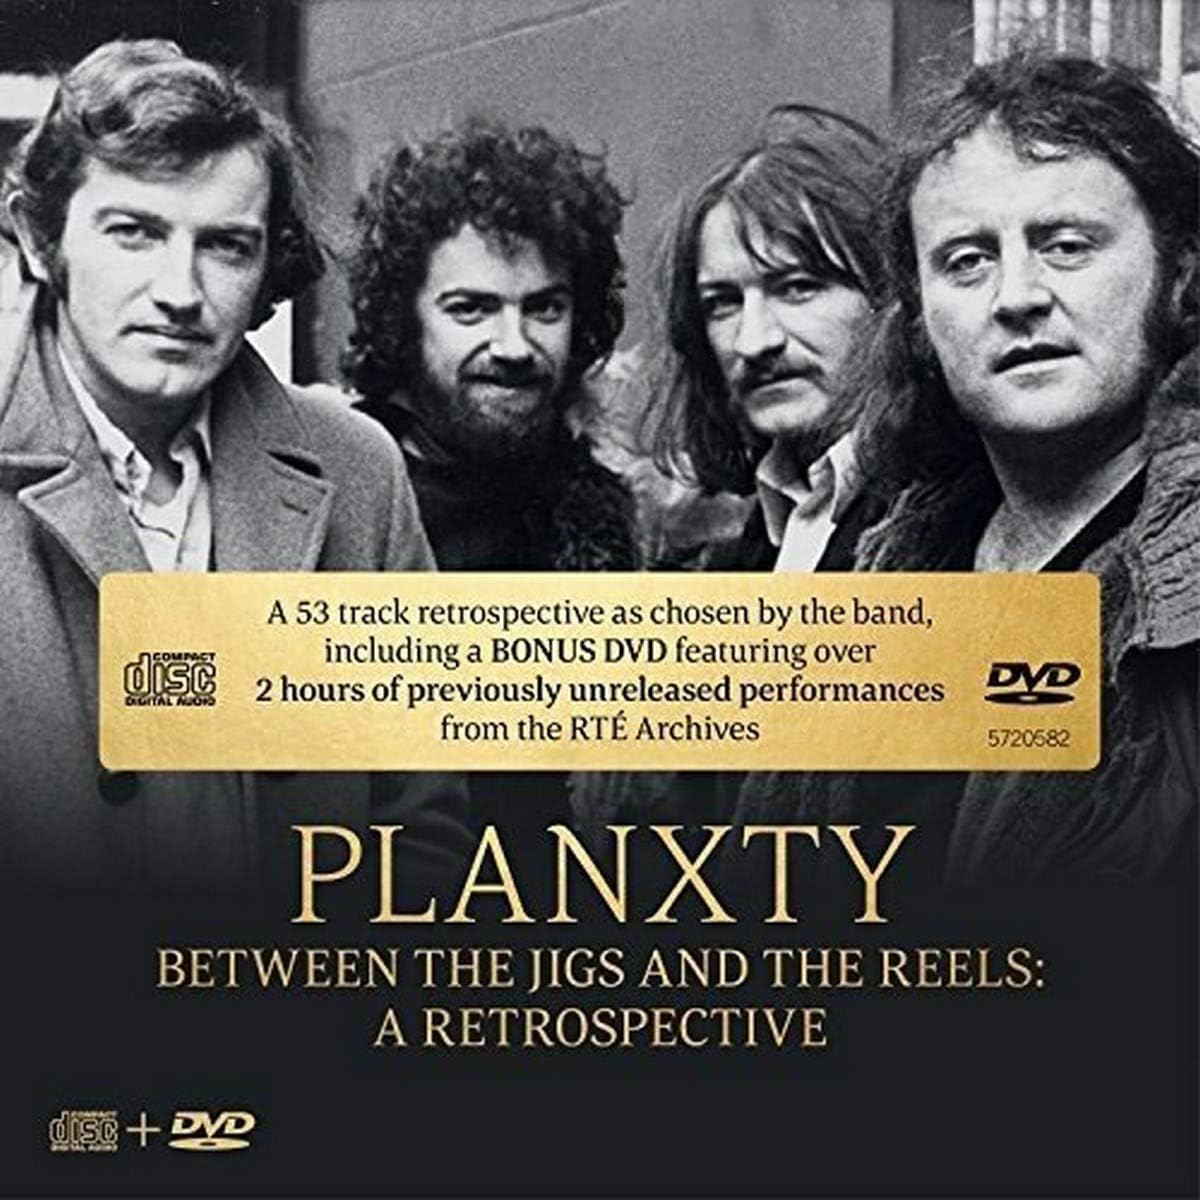 Planxty Between the Jigs and The Reels [CD/DVD] - Zhivago Gifts